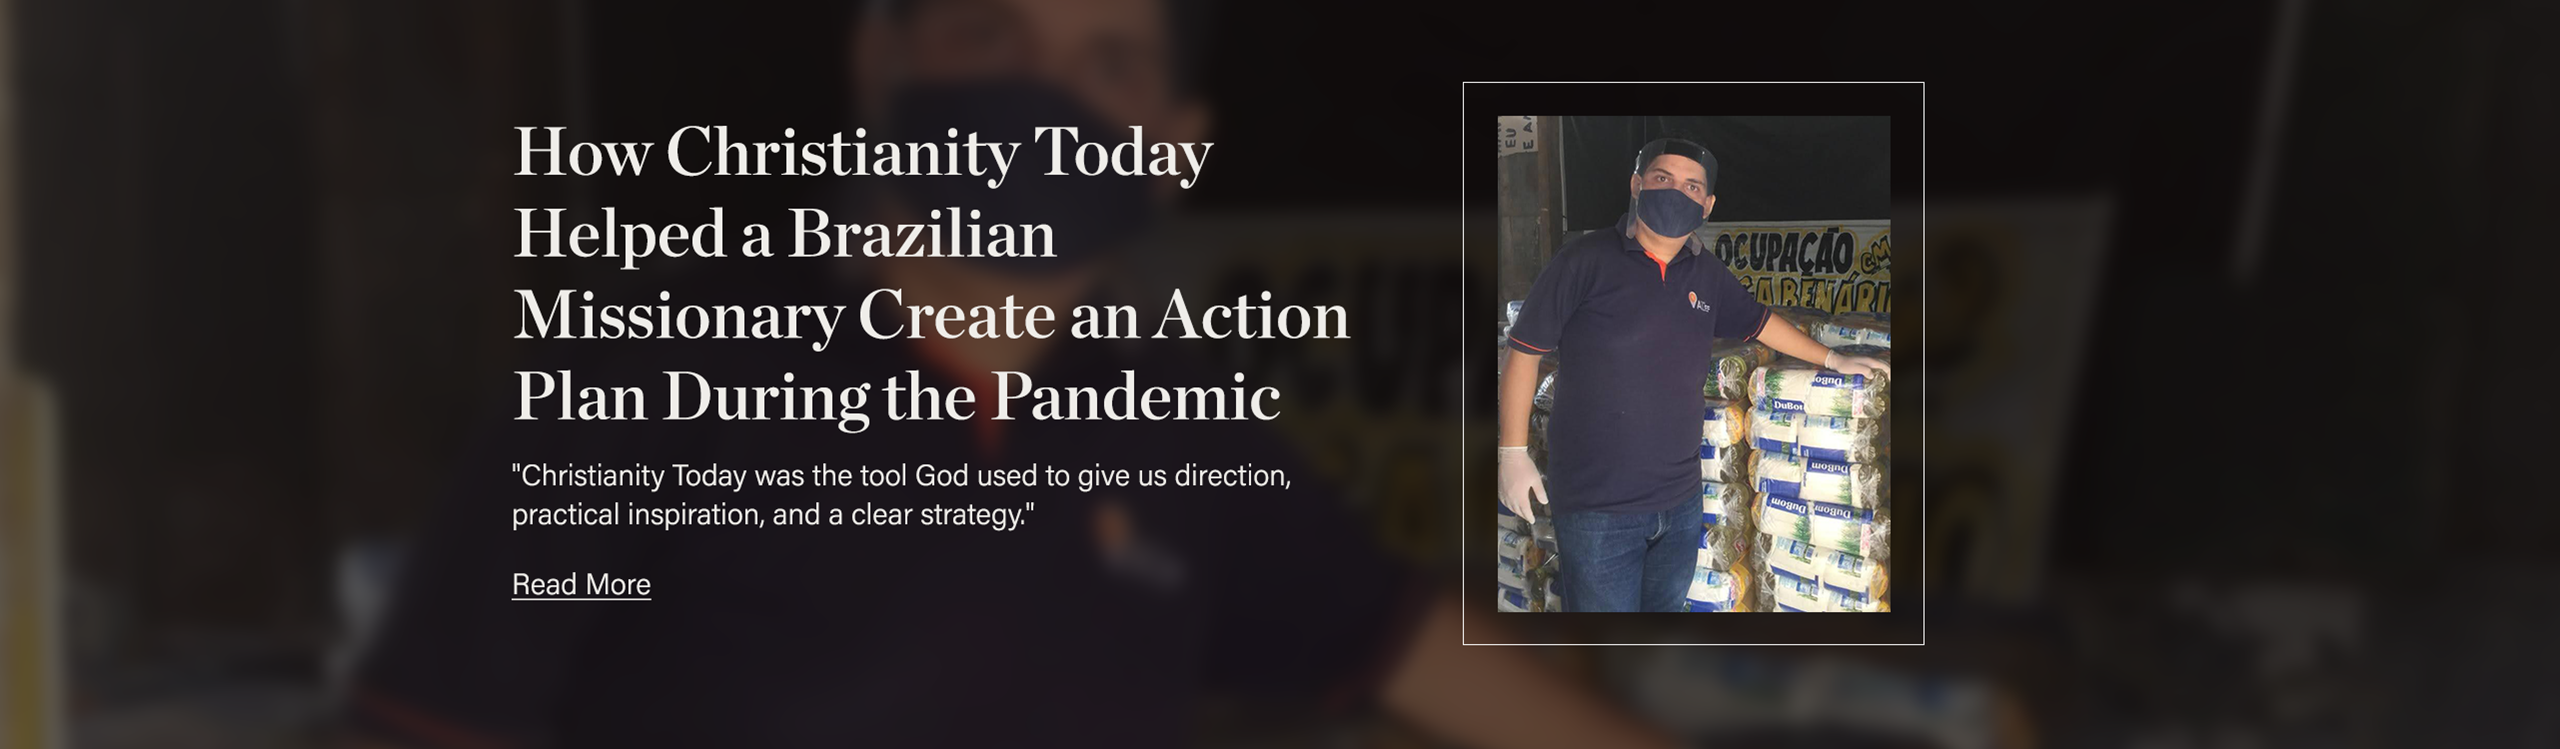 How Christianity Today Helped a Brazilian Missionary Create an Action Plan During the Pandemic: Christianity Today was the tool God used to get direction, practical inspiration, and a clear strategy.